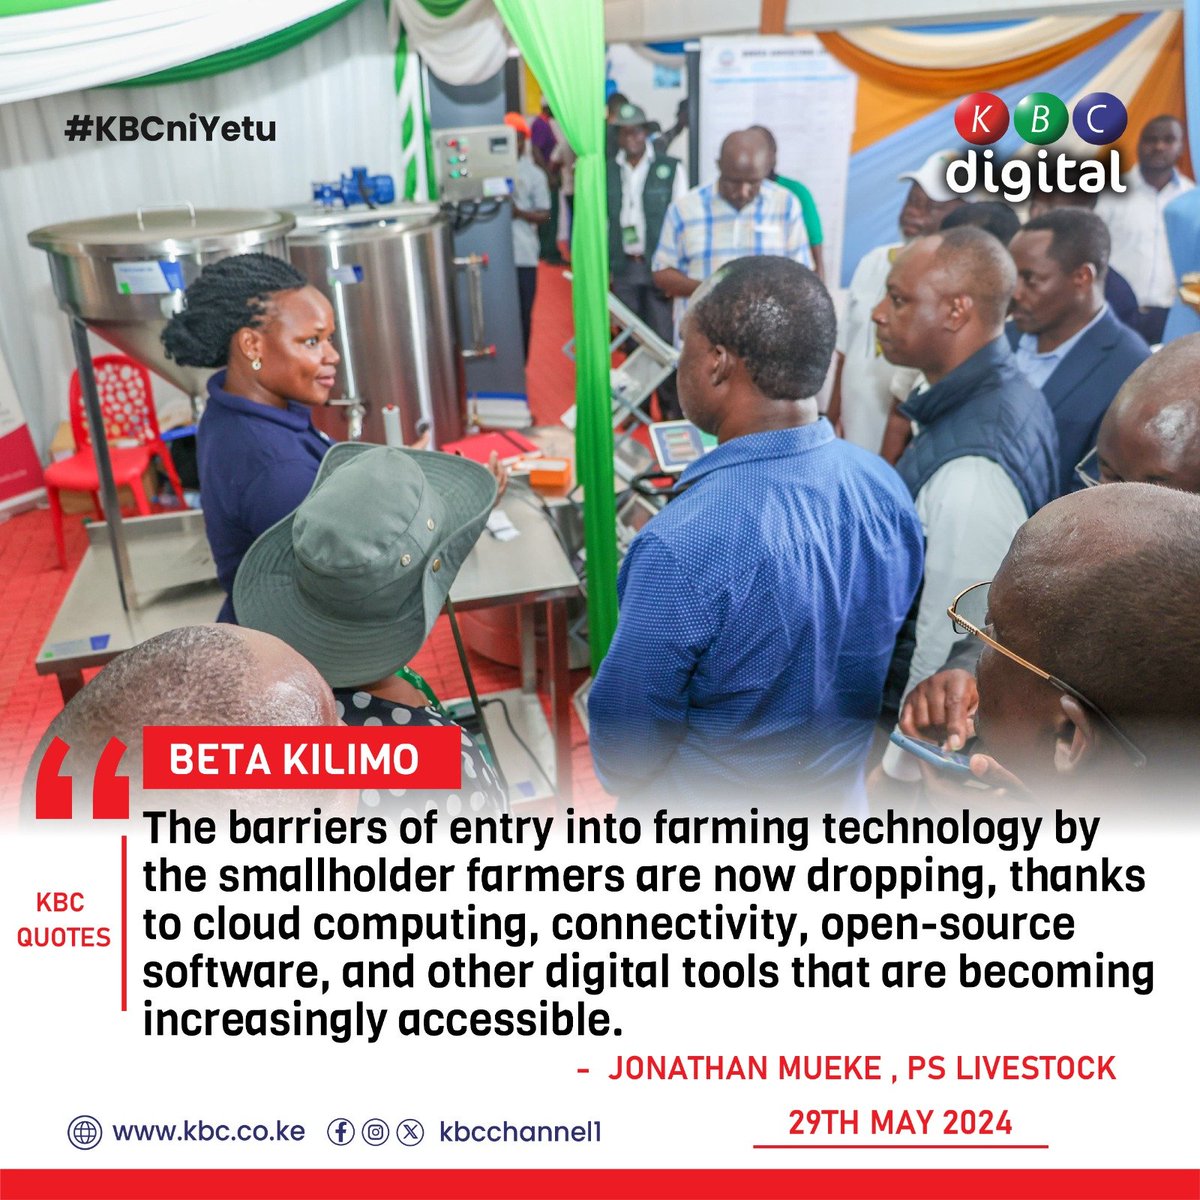 'The barriers of entry into farming technology by the smallholder farmers are now dropping, thanks to cloud computing, connectivity, open-source software, and other digital tools that are becoming increasingly accessible.'
- PS Livestock Jonathan Mueke
@jmueke @kilimoKE